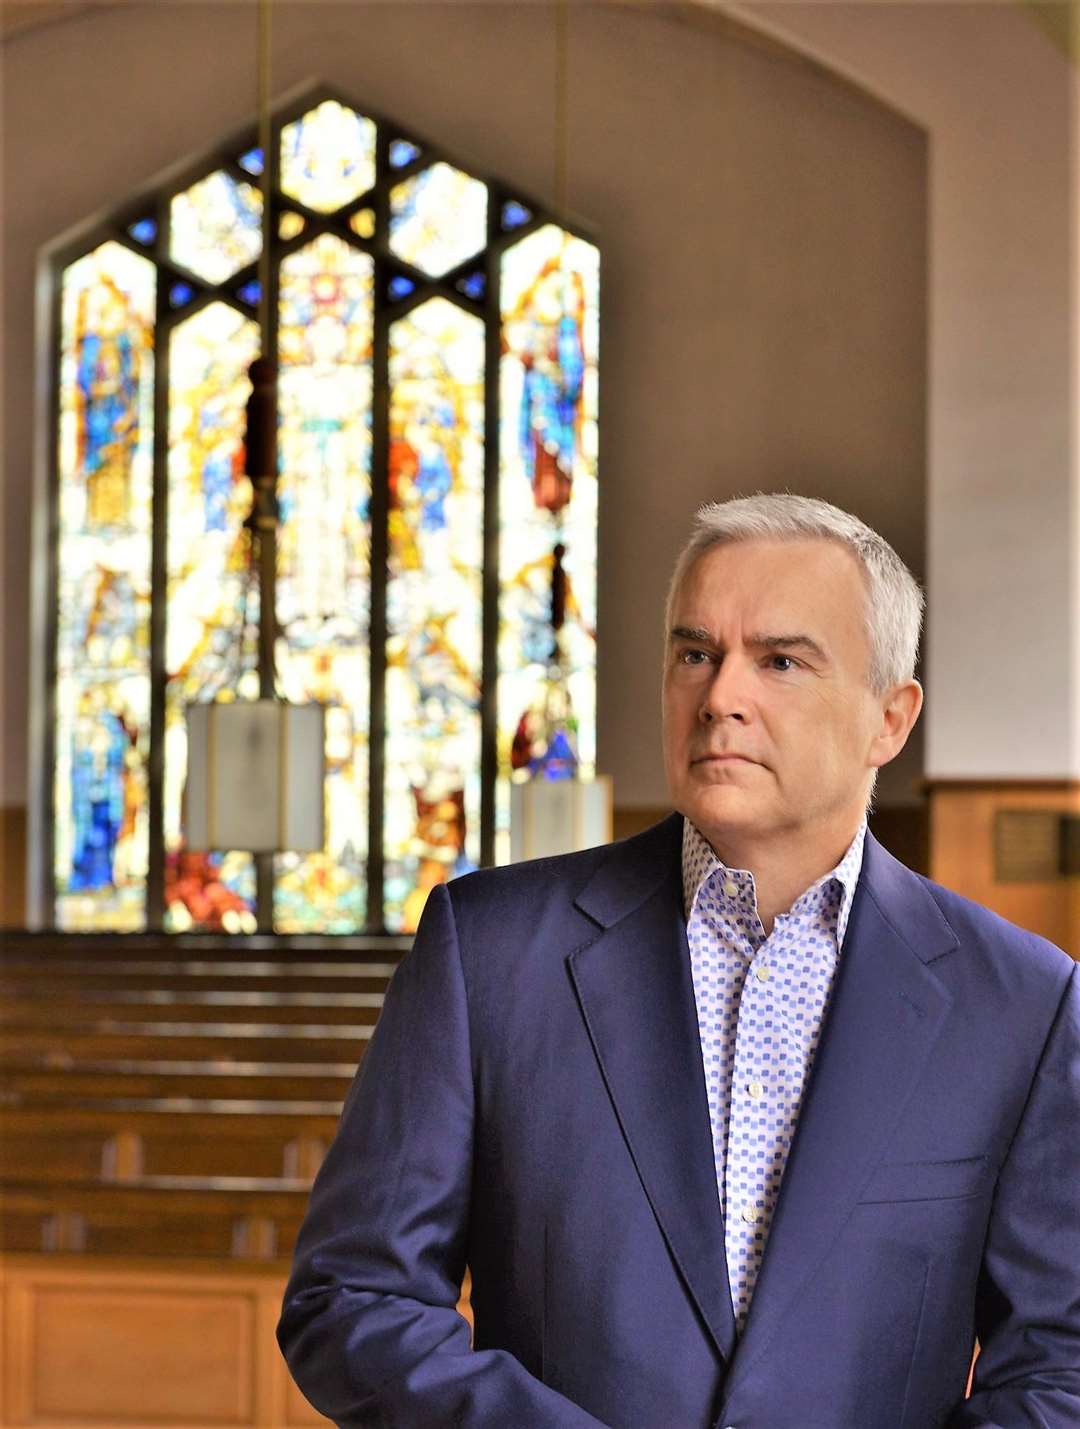 Broadcaster and journalist Huw Edwards said he was delighted that St John's church in Wick is being helped with a £10,000 grant.